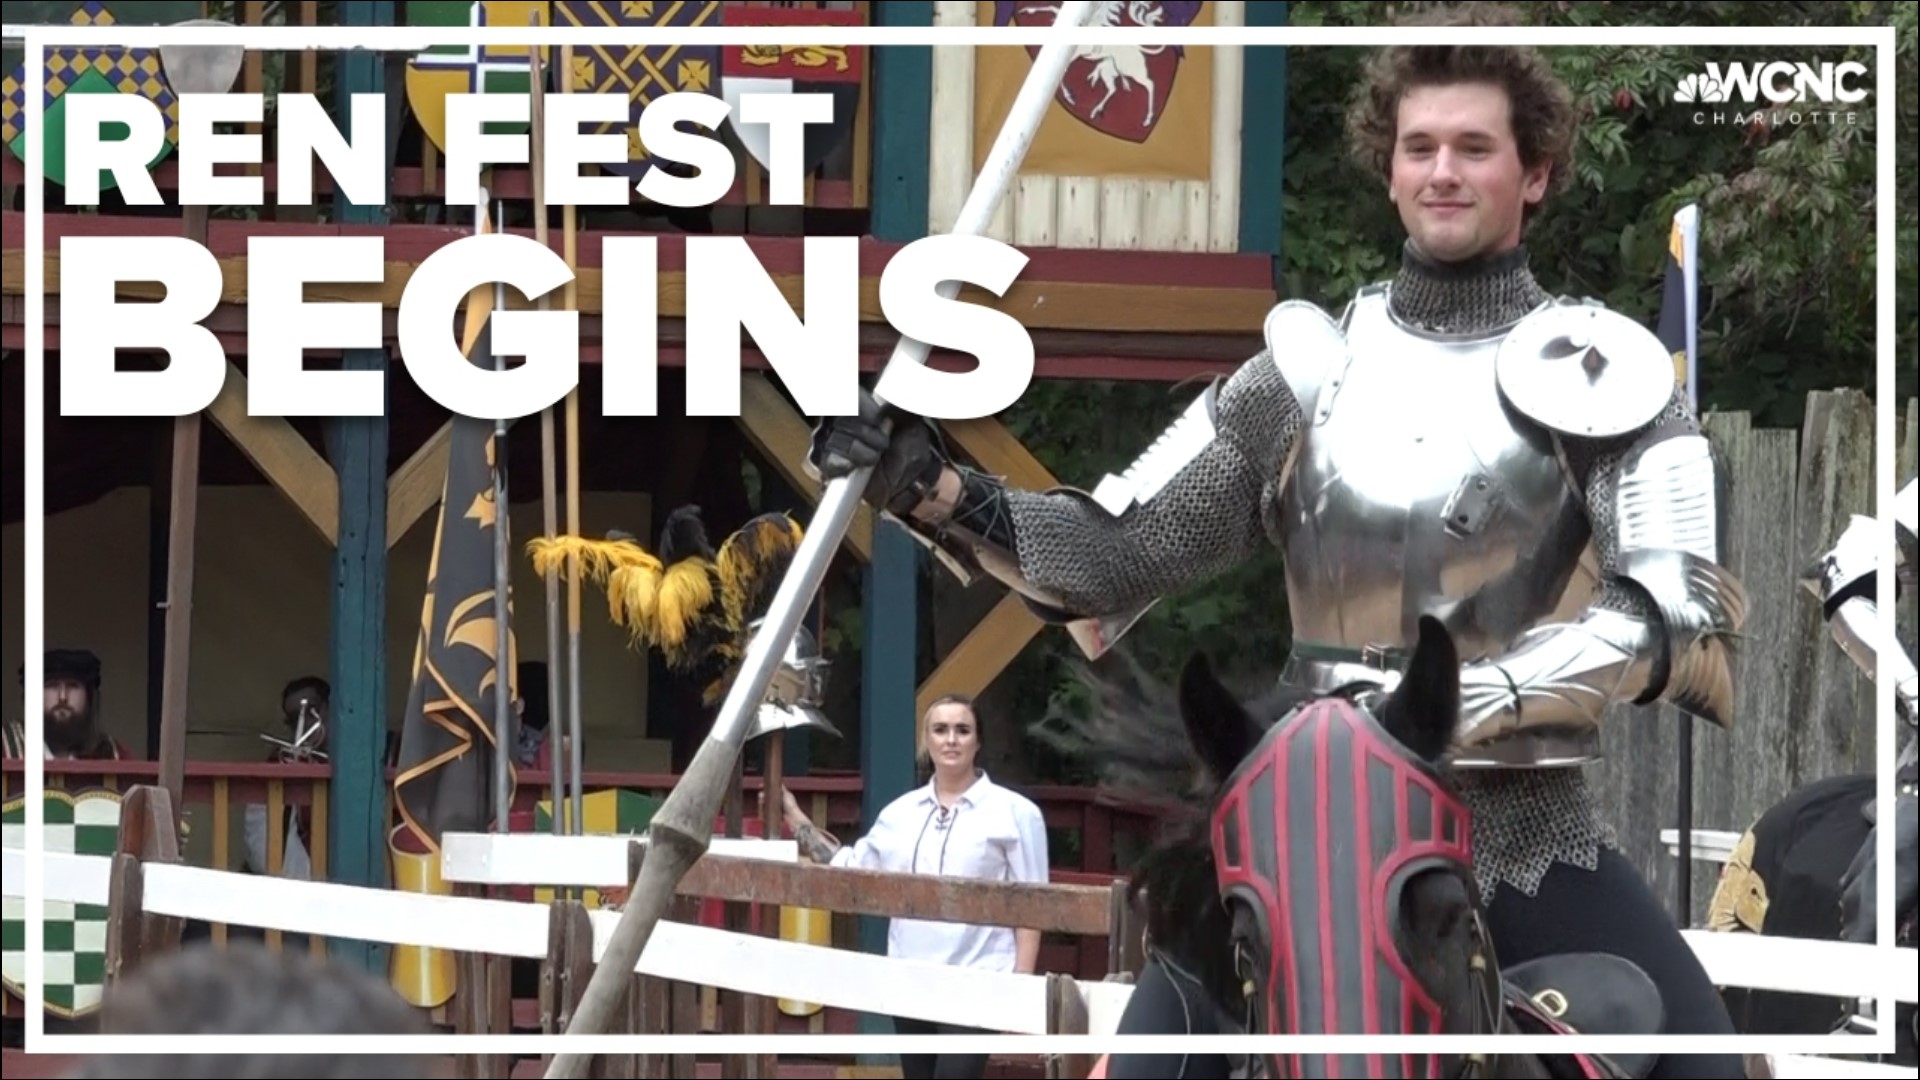 On weekends from Oct. 1 through Nov. 20, festival-goers can get medieval and enjoy all sorts of fantasy-themed events.